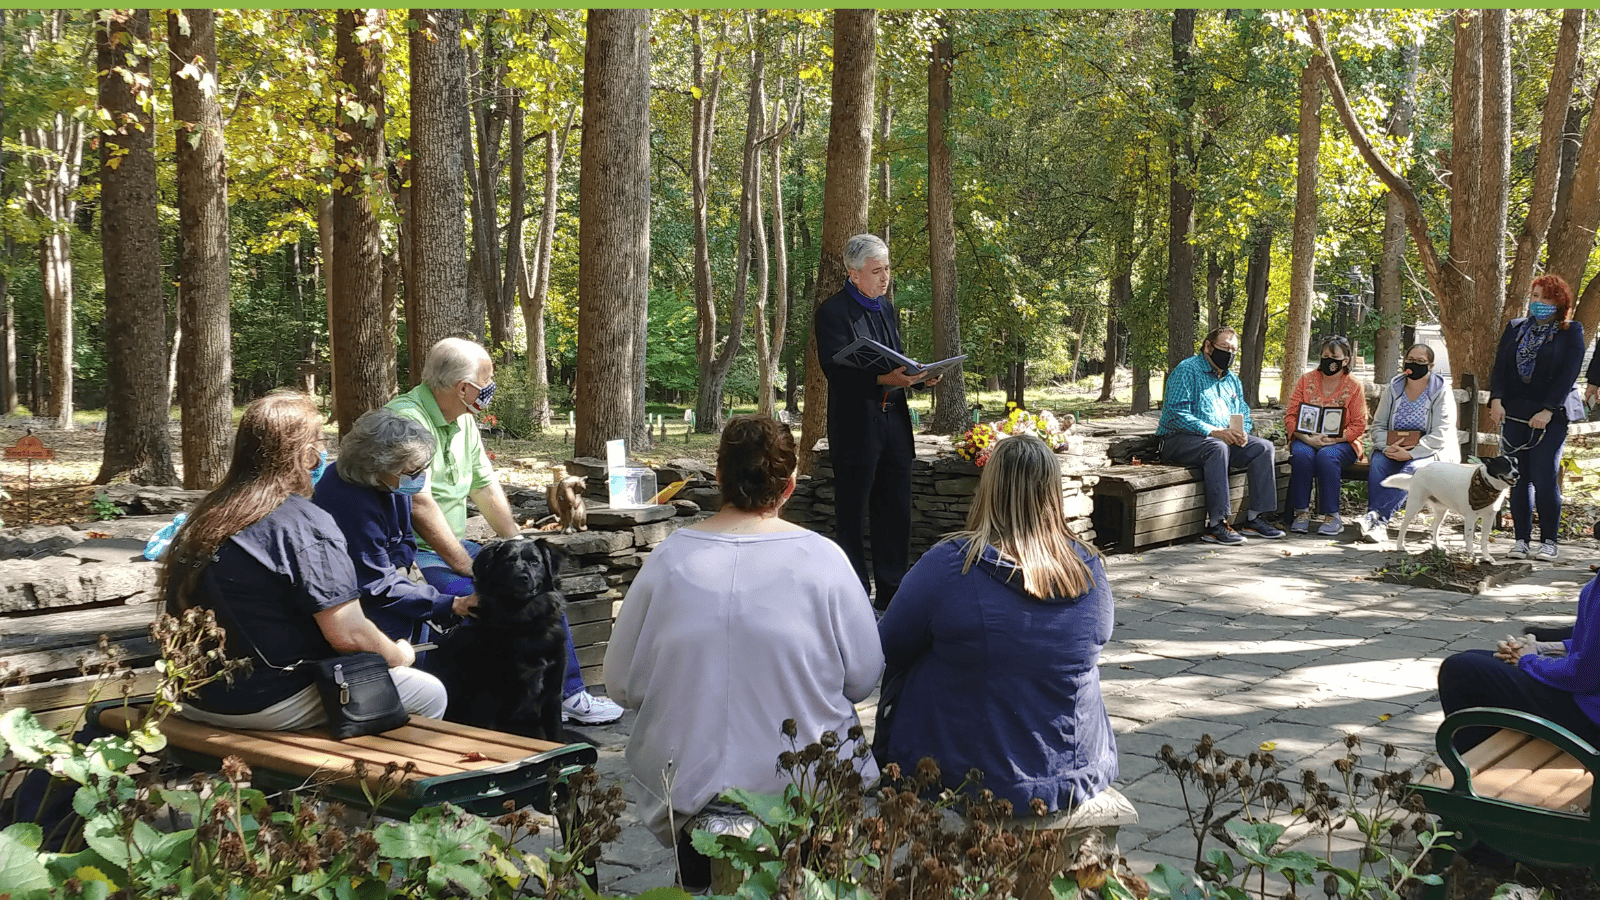 minister readingprayers in the woods surrounded by people and their pets.